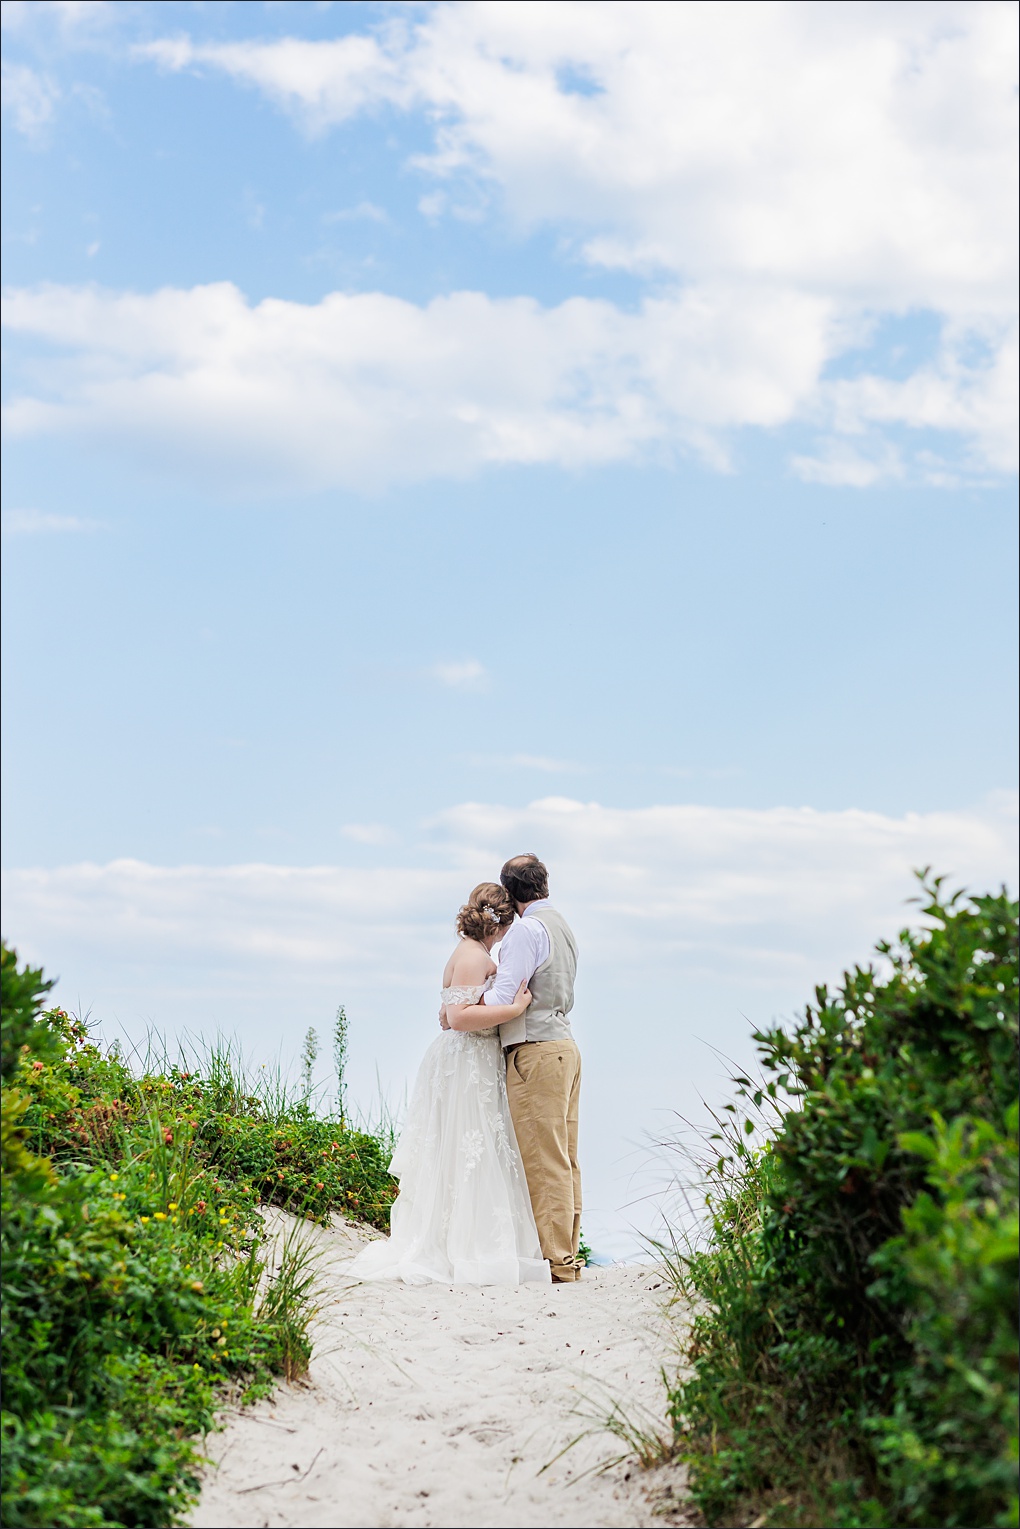 The bride and groom down by the beach in Cape Elizabeth Maine